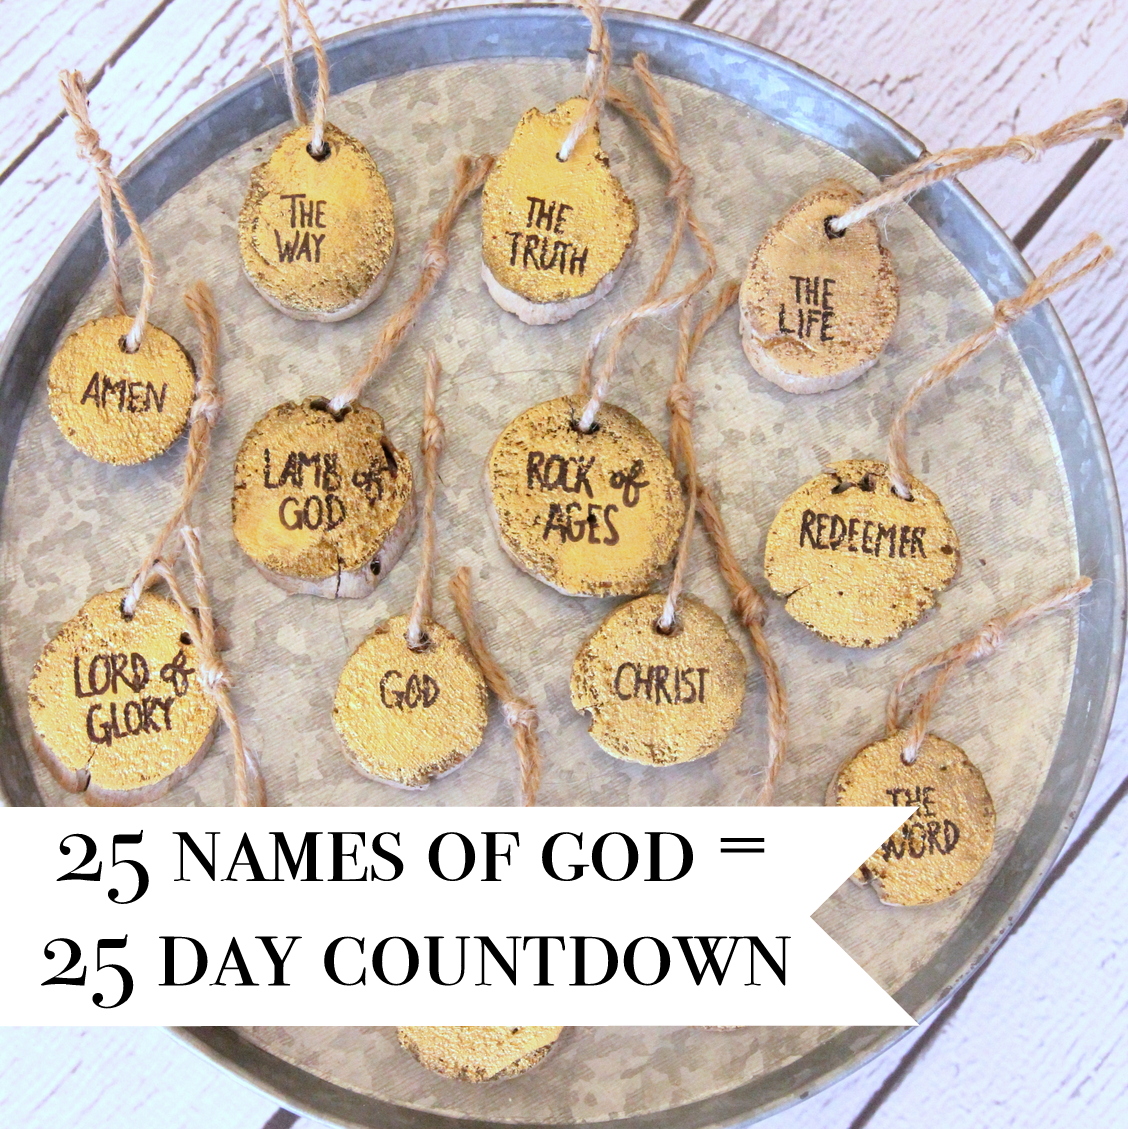 An advent countdown, but with a twist- each ornament has a name of God written on it (there are accompanying devotions using the Jesus Storybook Bible for the names they chose)